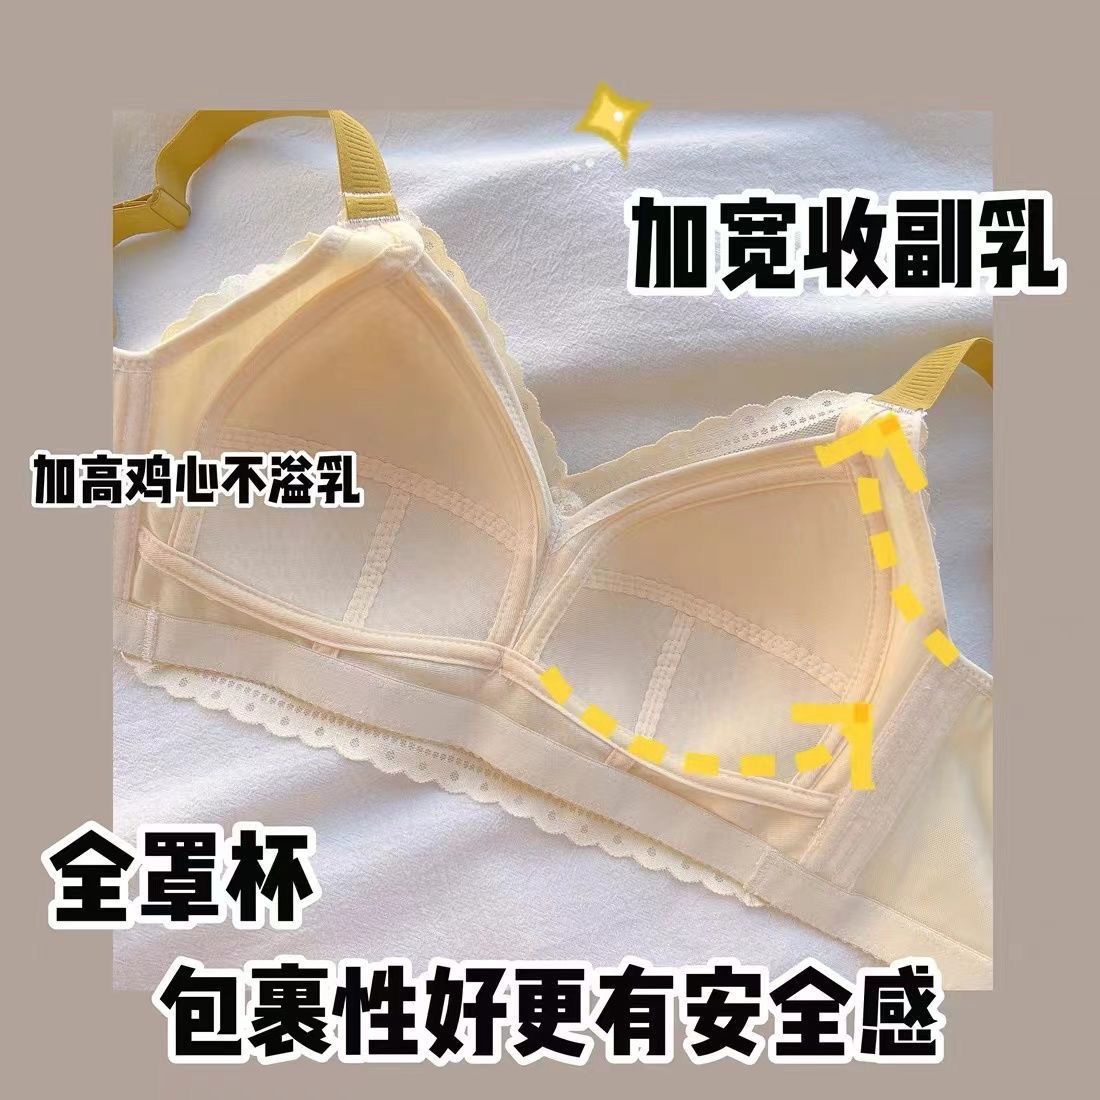 Underwear women's big breasts look small ultra-thin large size non-steel ring gathered breast reduction breast reduction adjustable bra